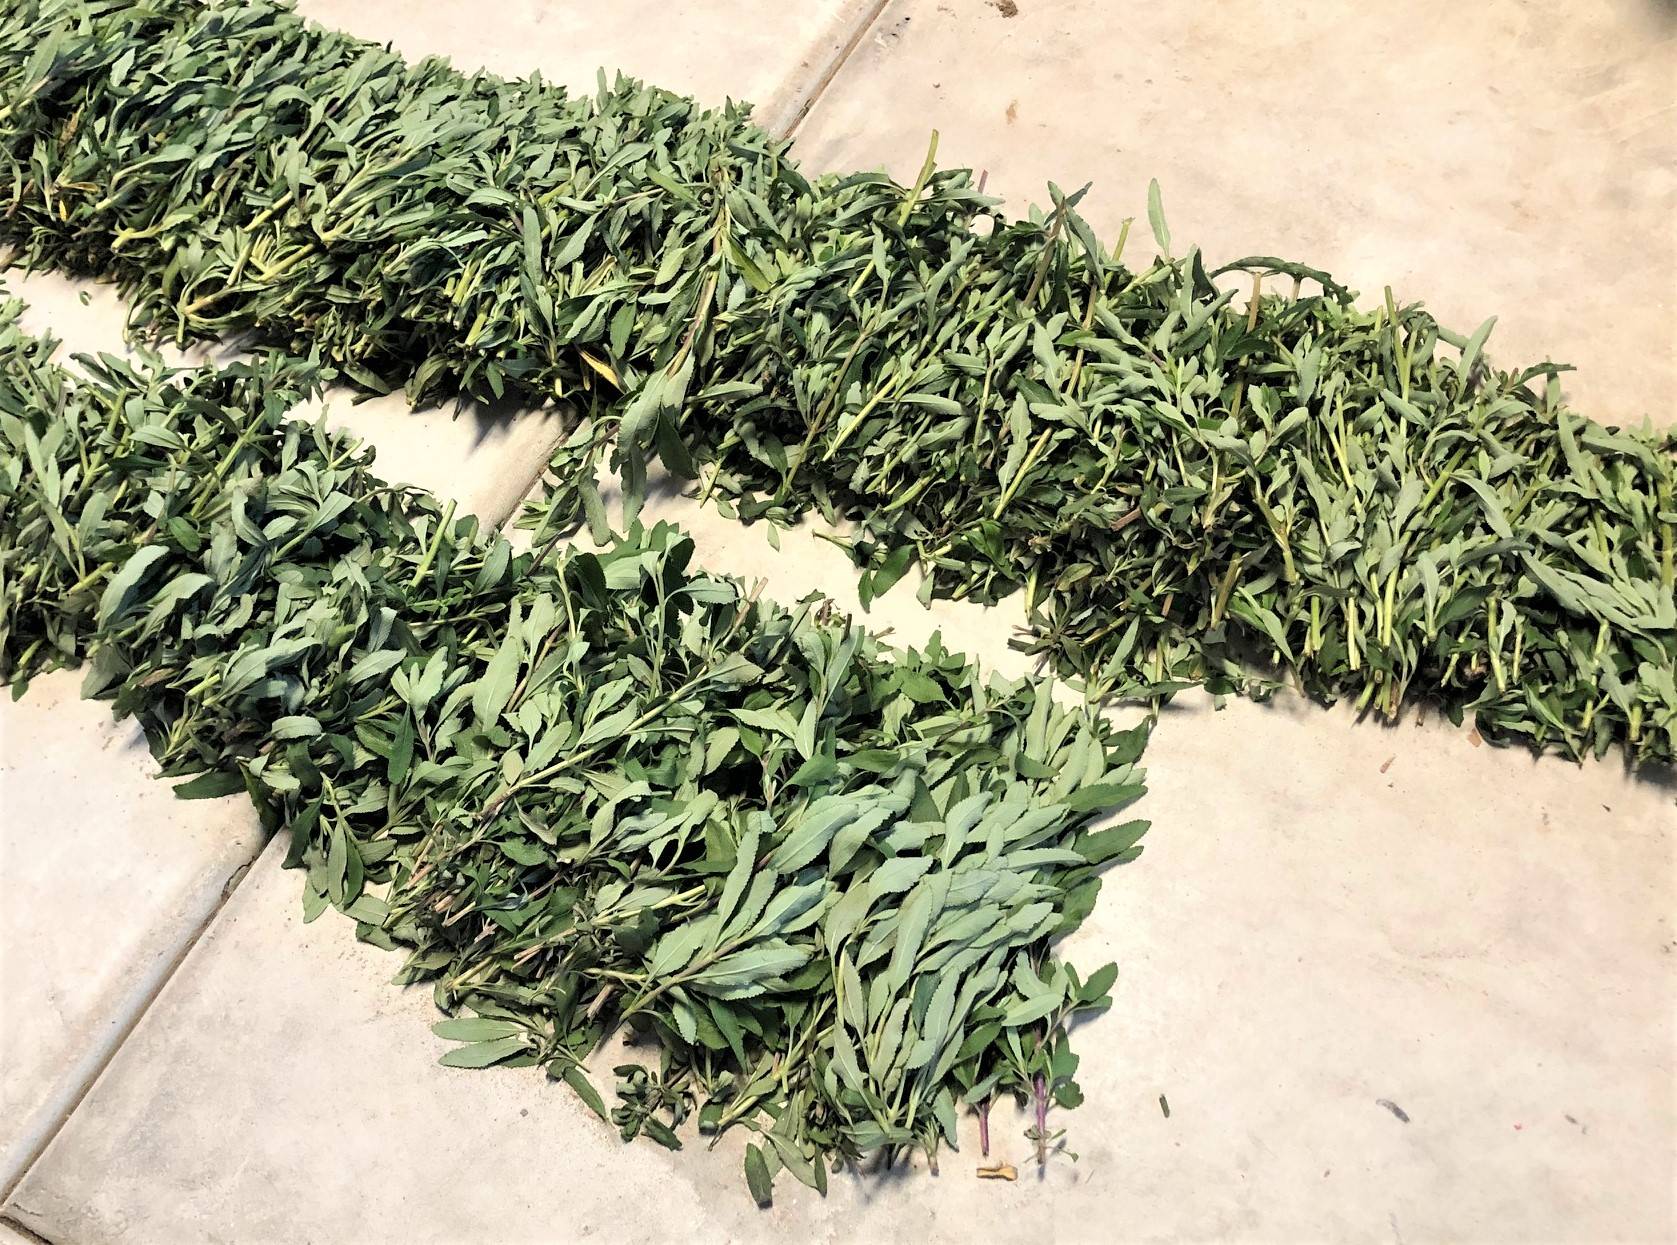 High Quality Organics Express dried sage on the concrete